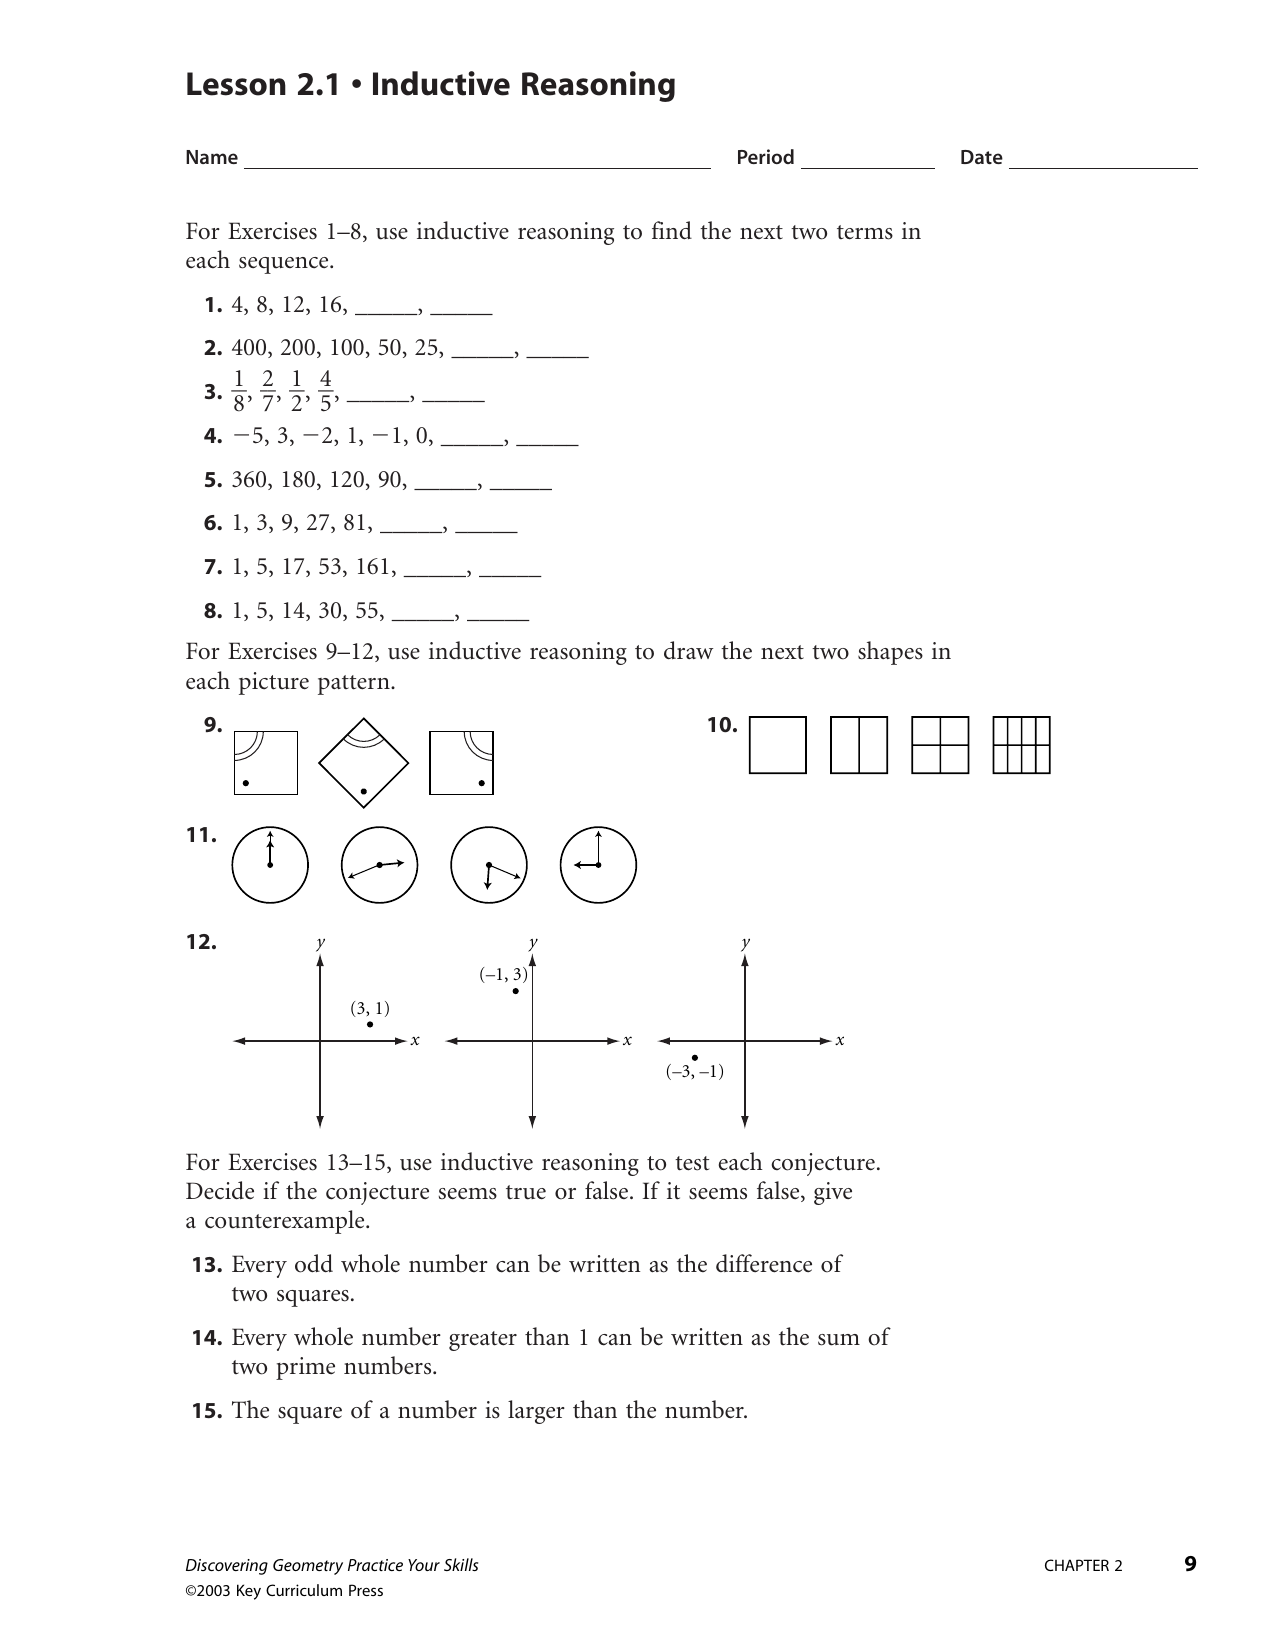 Patterns And Inductive Reasoning Worksheet And Answers 